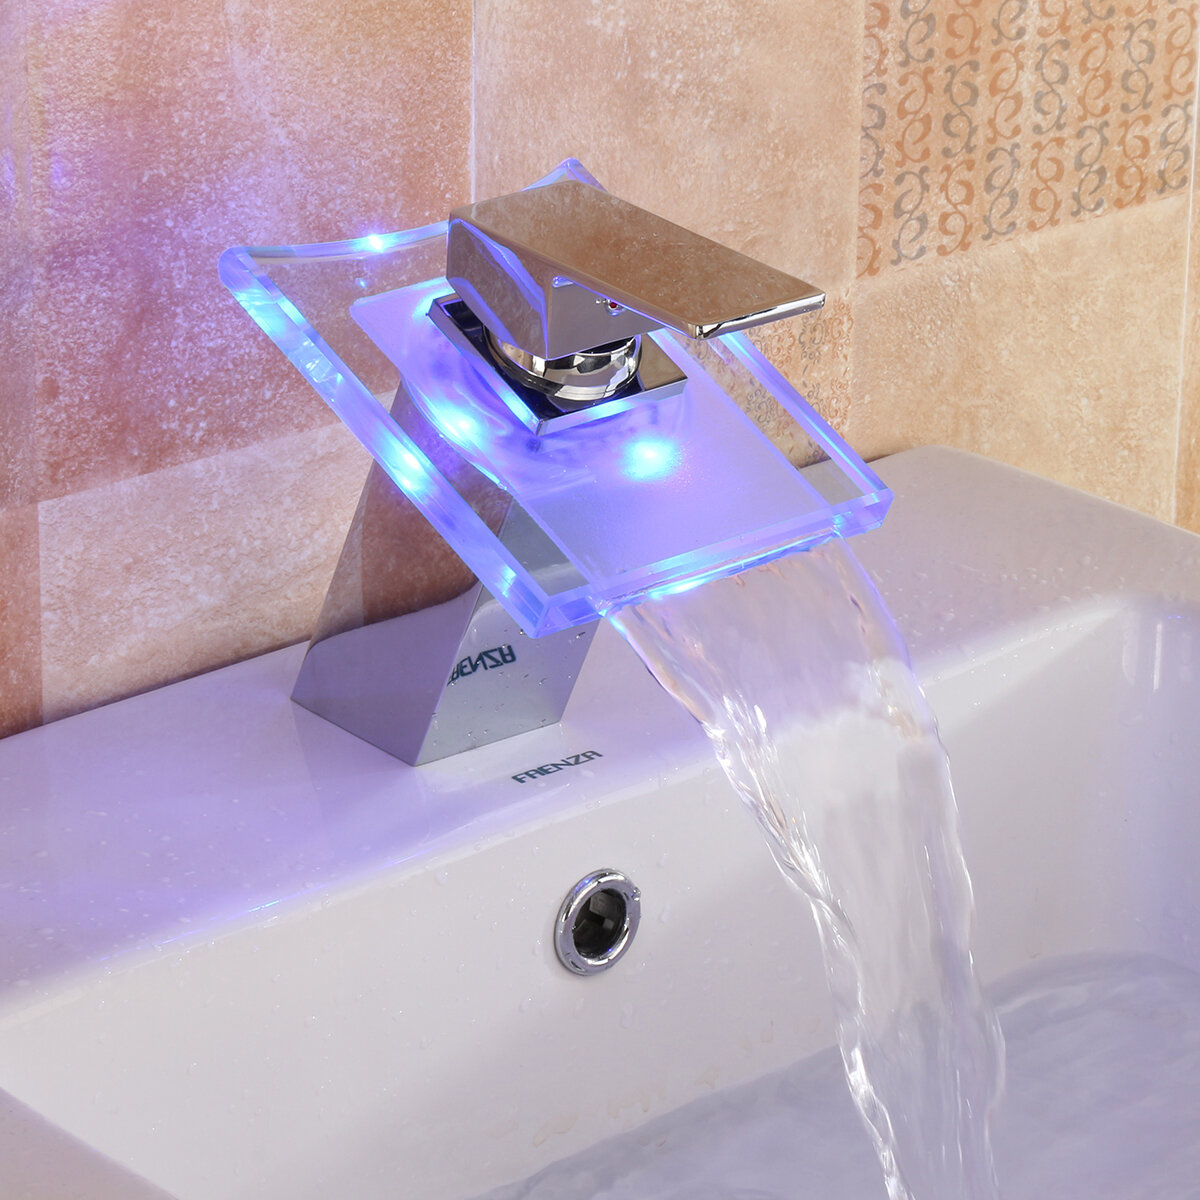 

LED Color Changing Waterfall Faucet Bathroom Sink Faucet Glass Basin Bathtub Mixer Tap